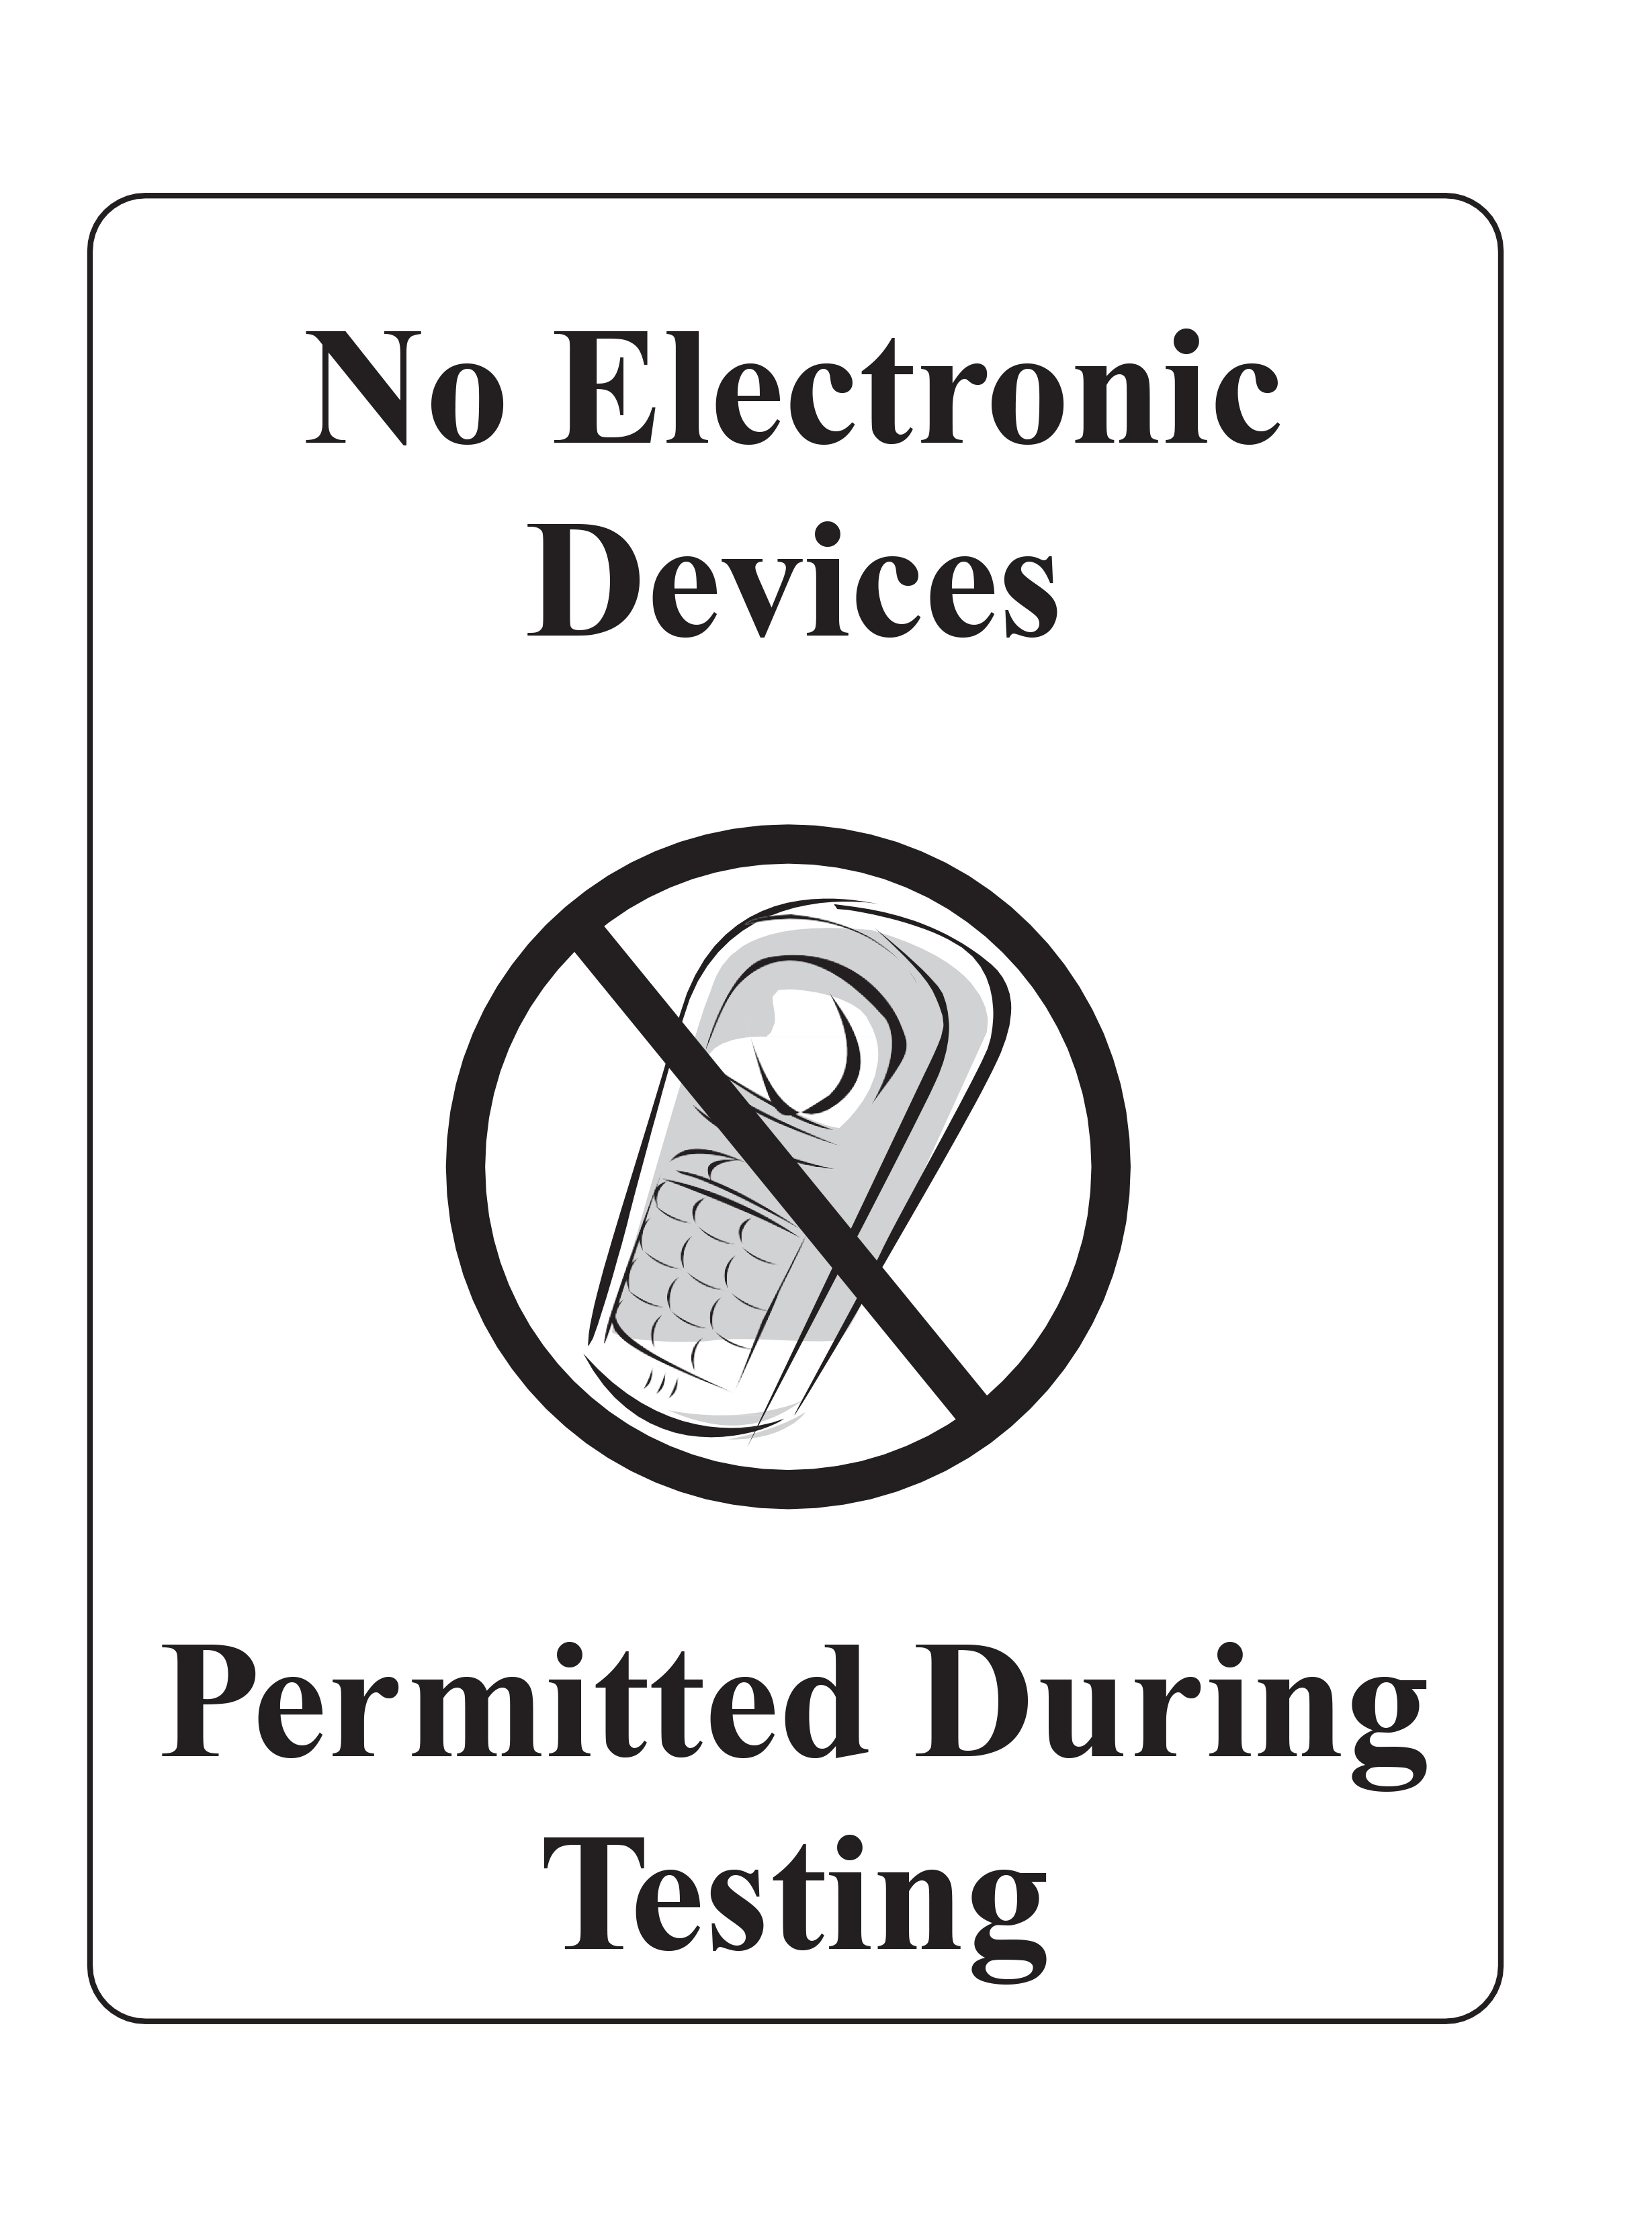 no electronic devices sign